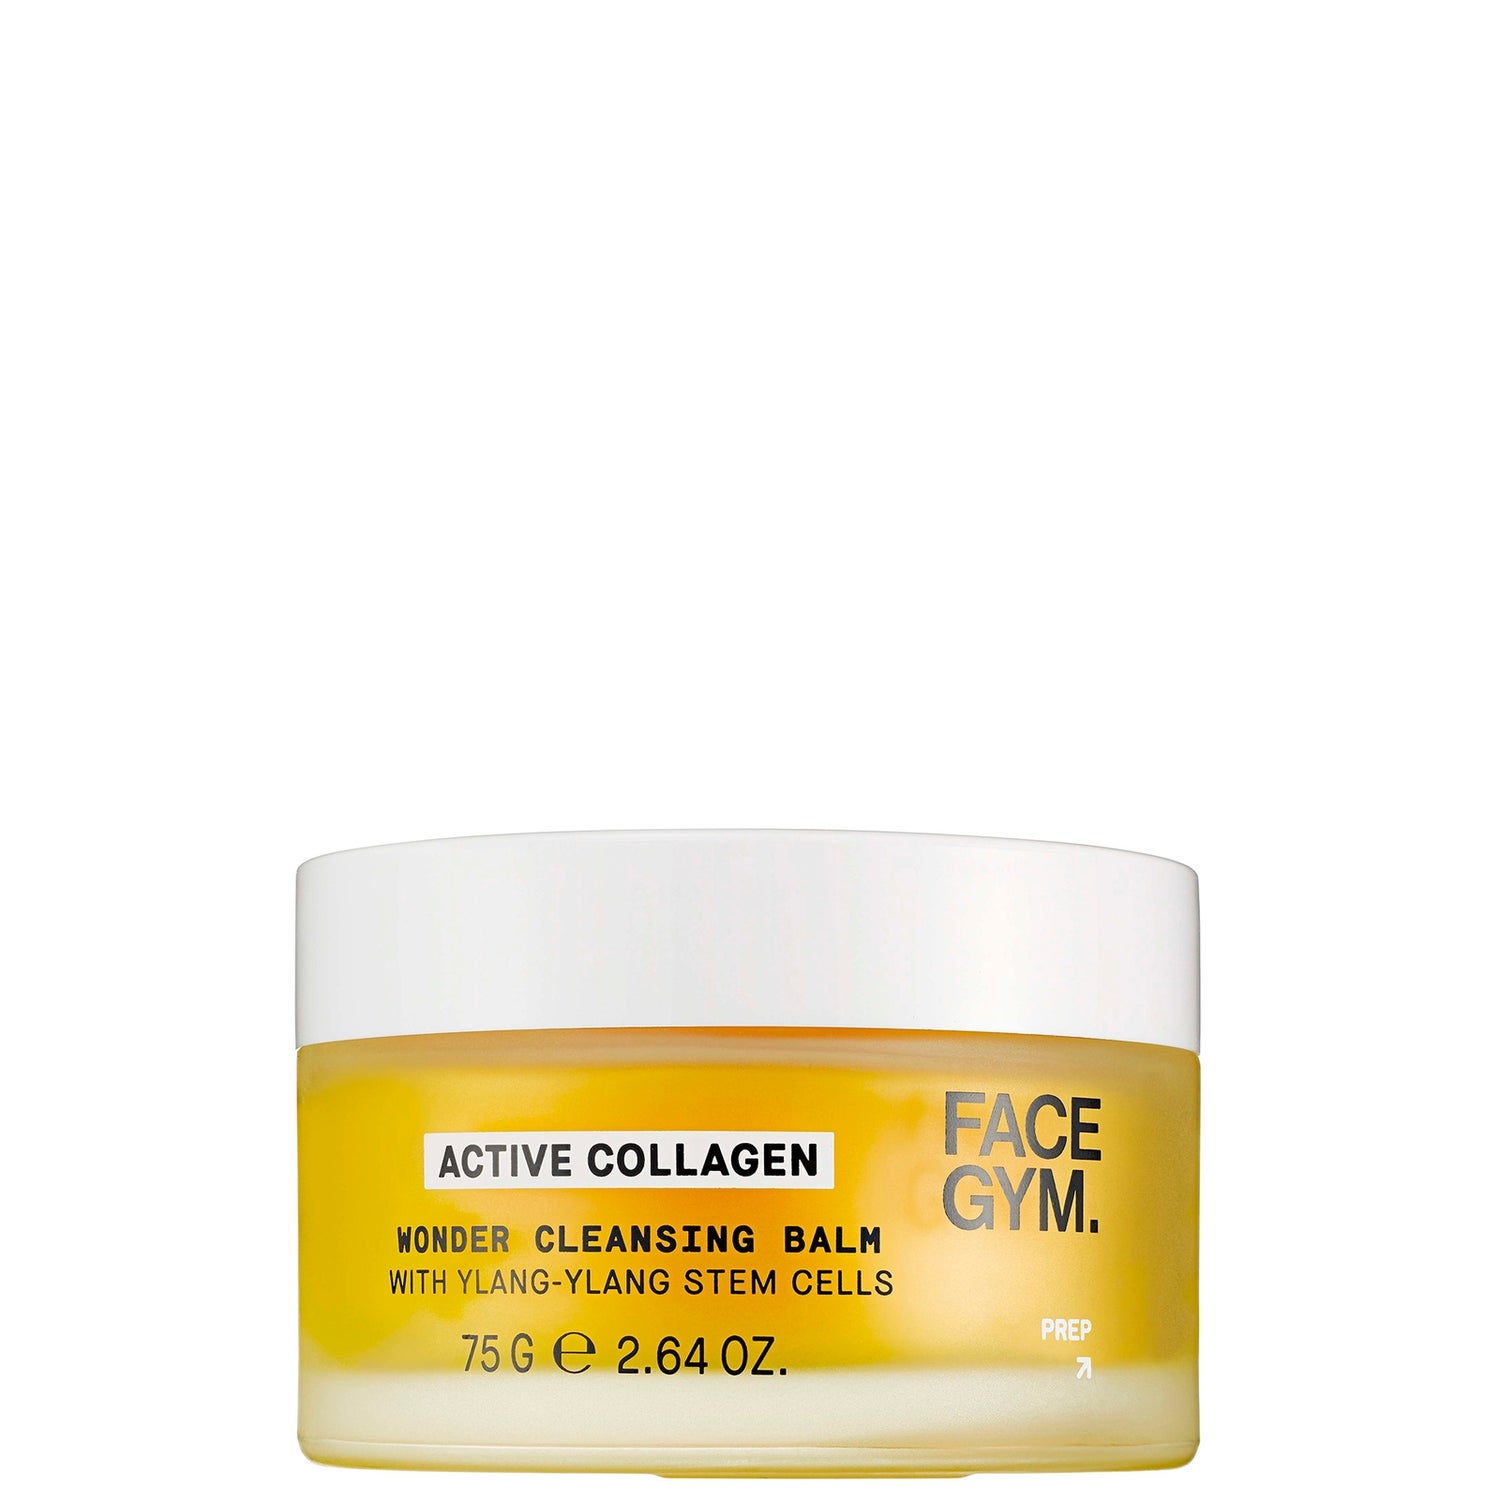 FaceGym Active Collagen Wonder Cleansing Balm with Ylang-Ylang Stem Cells 75g